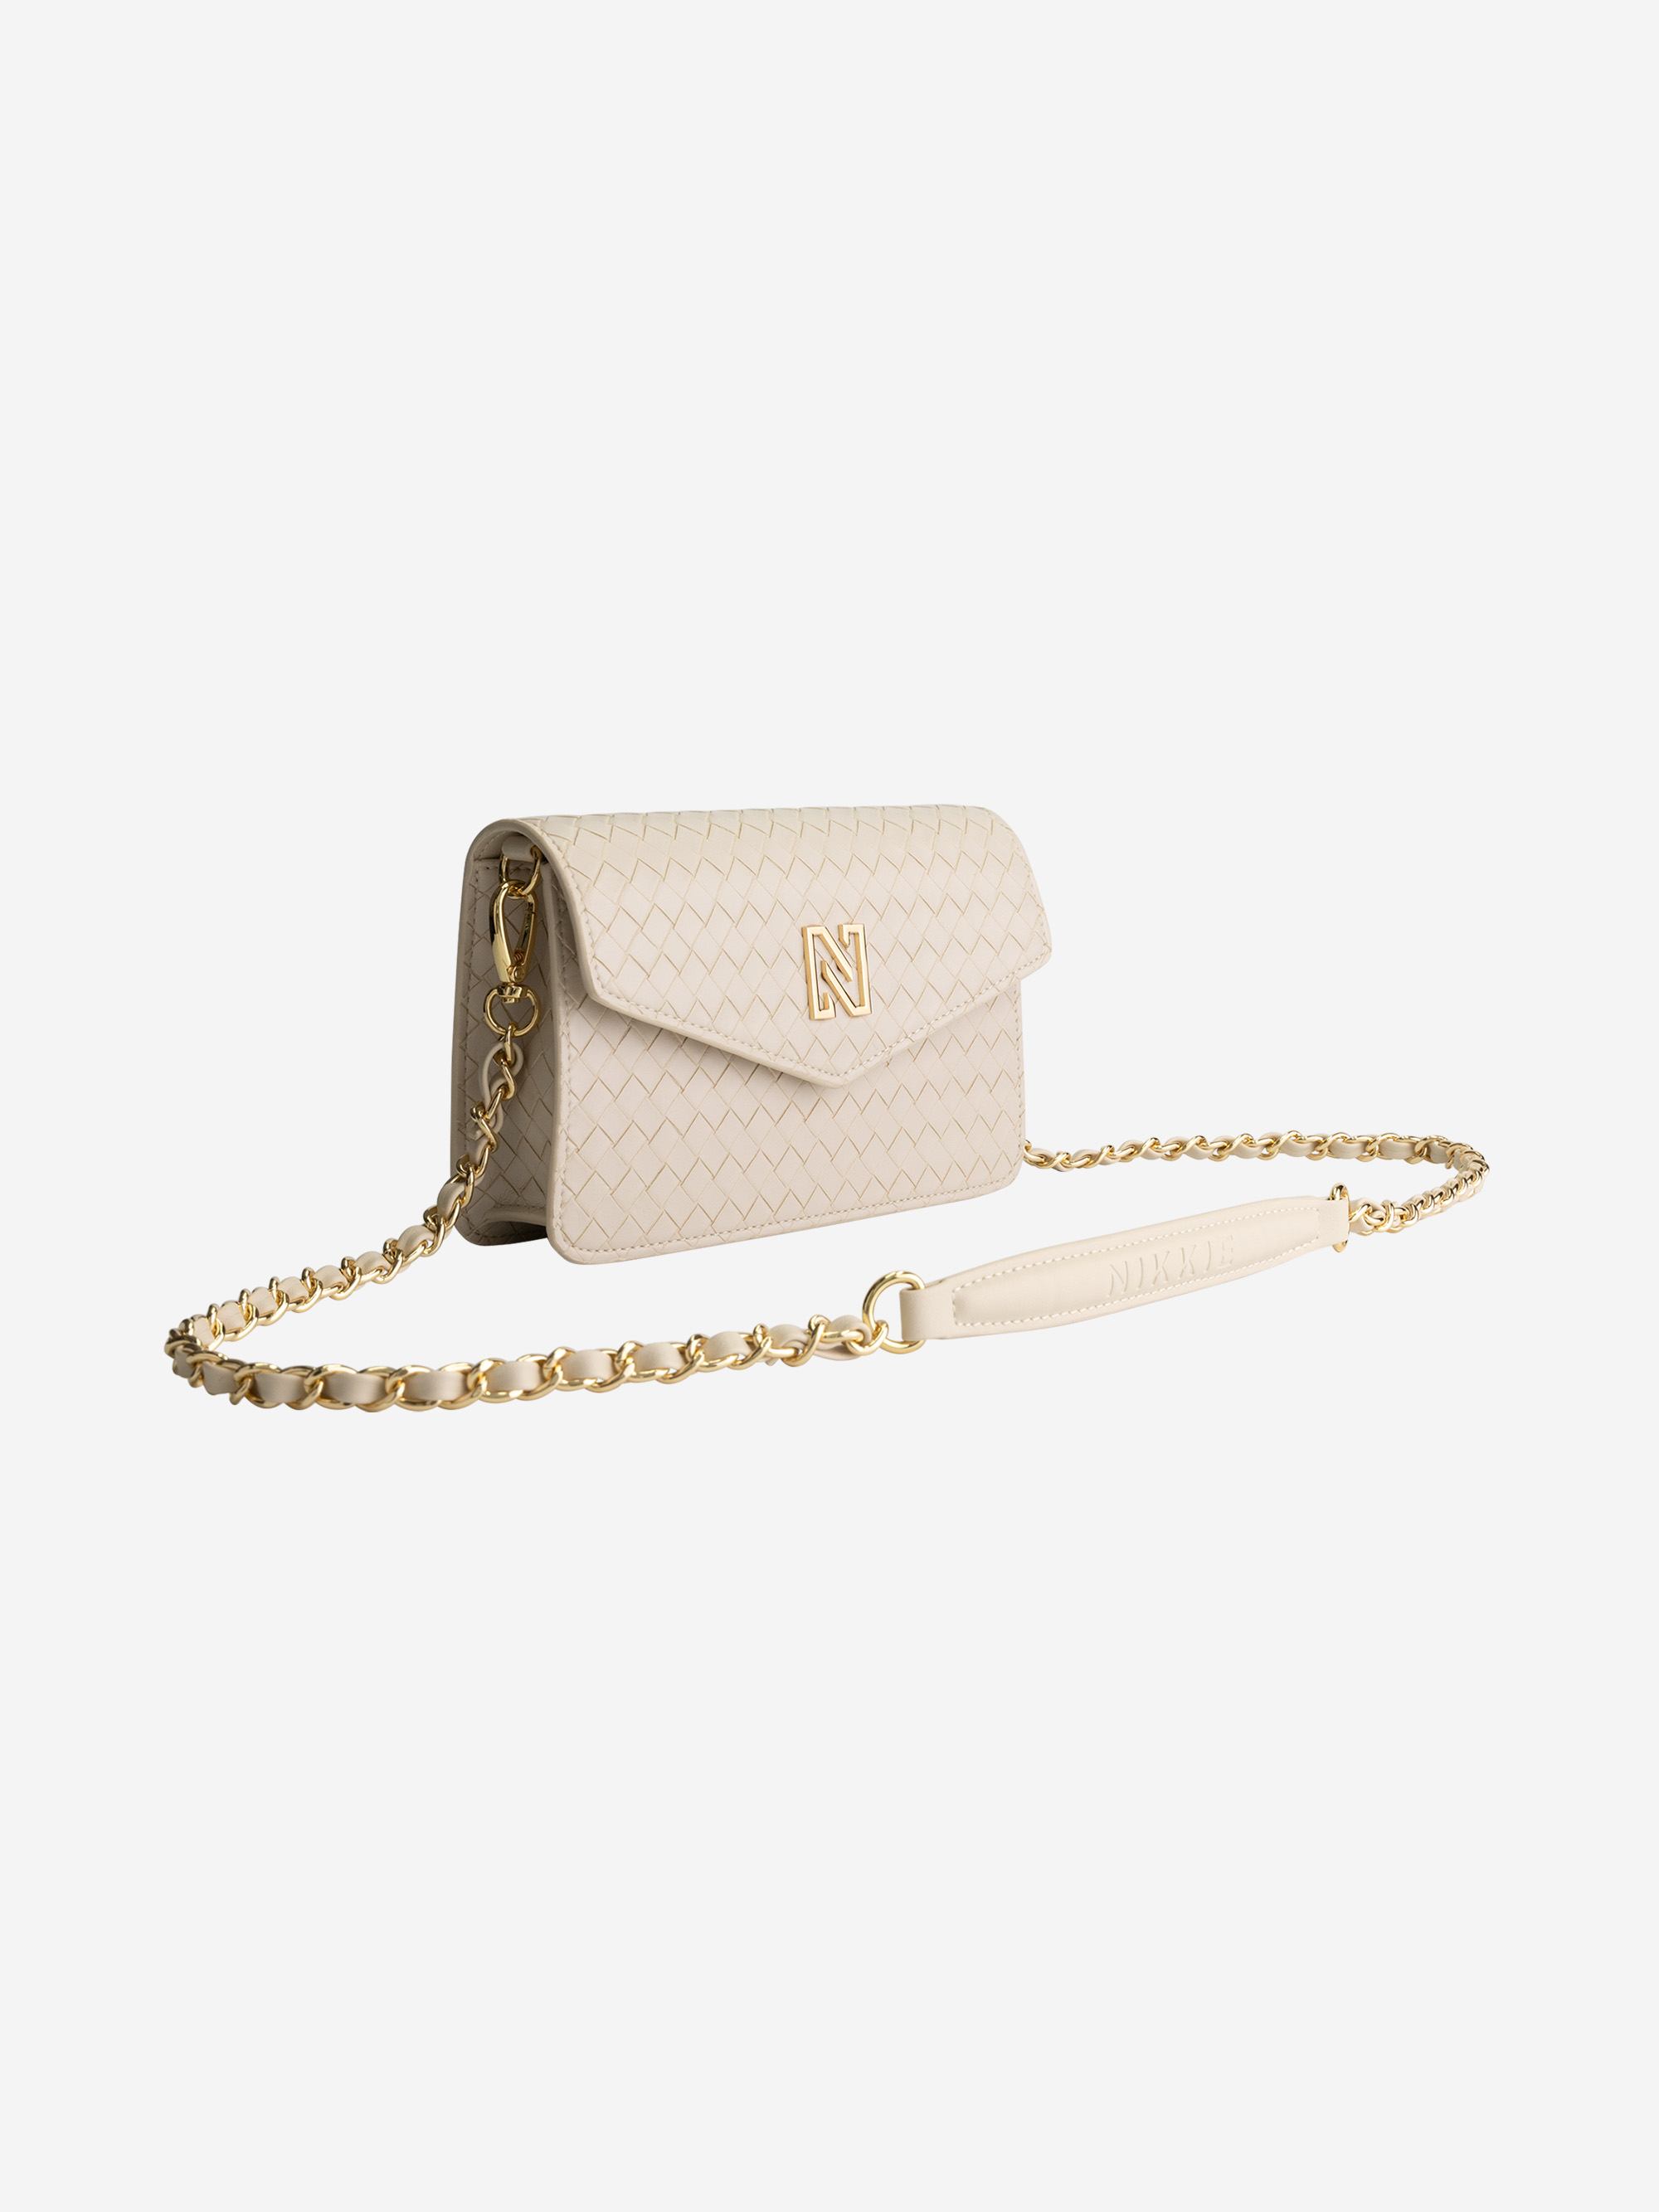 Shoulderbag with chain